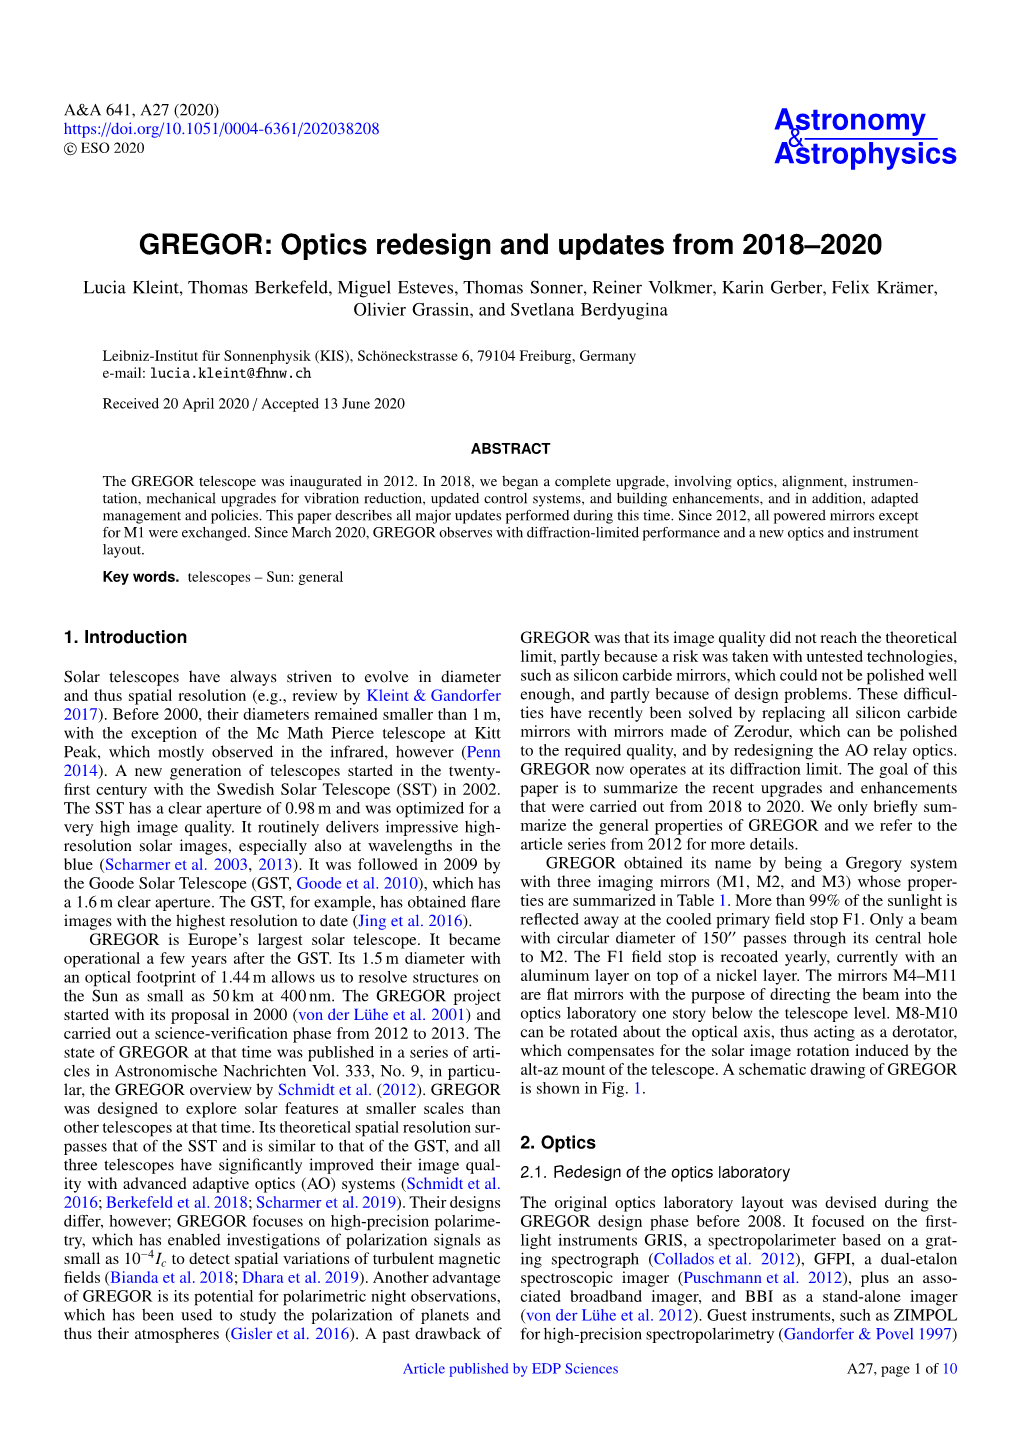 GREGOR: Optics Redesign and Updates from 2018–2020